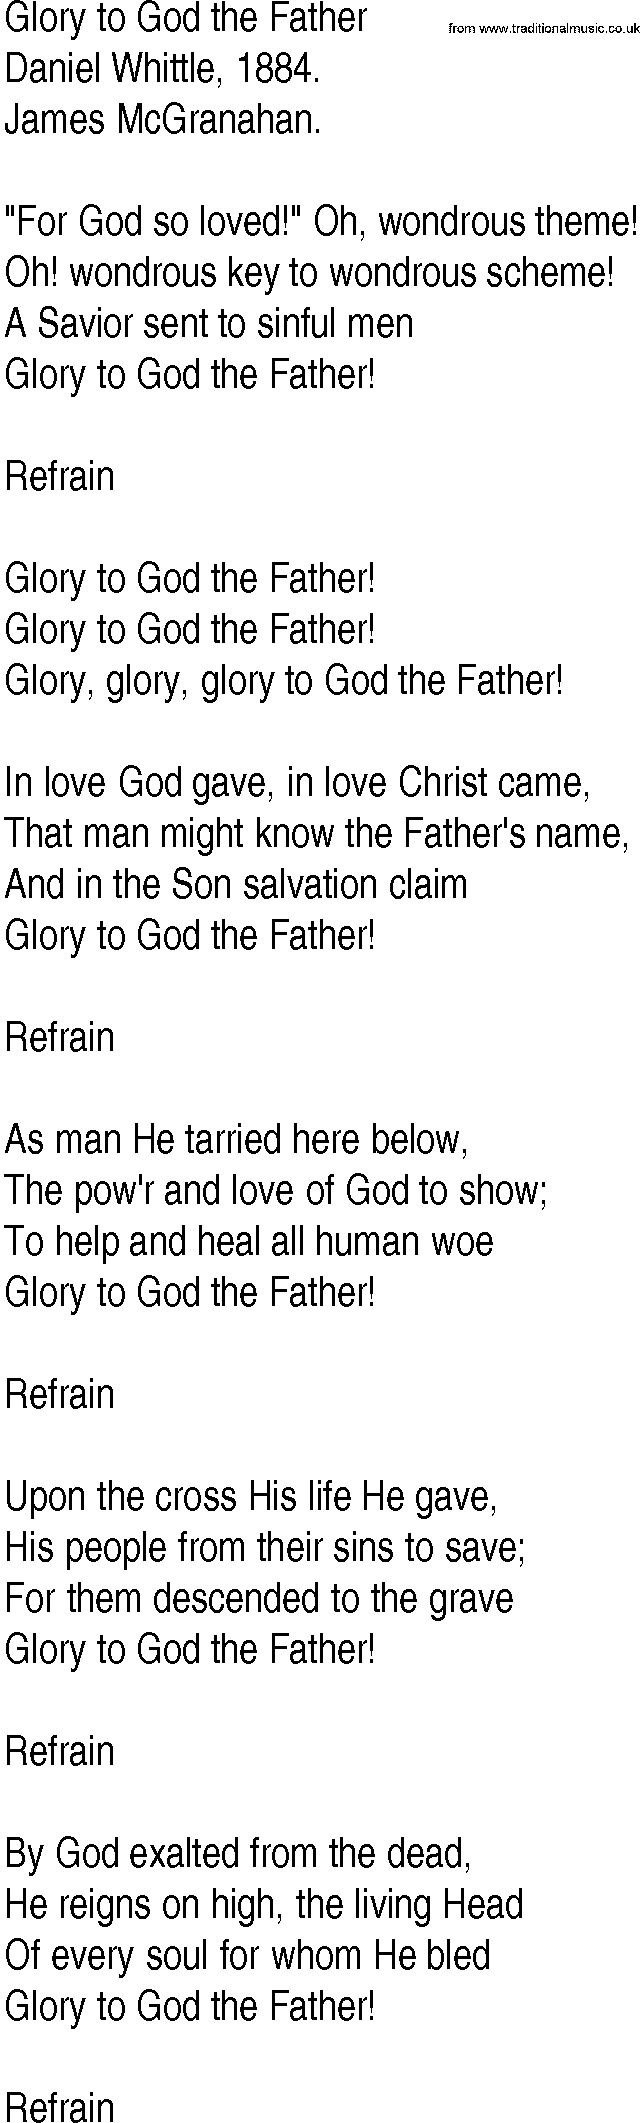 Hymn and Gospel Song: Glory to God the Father by Daniel Whittle lyrics